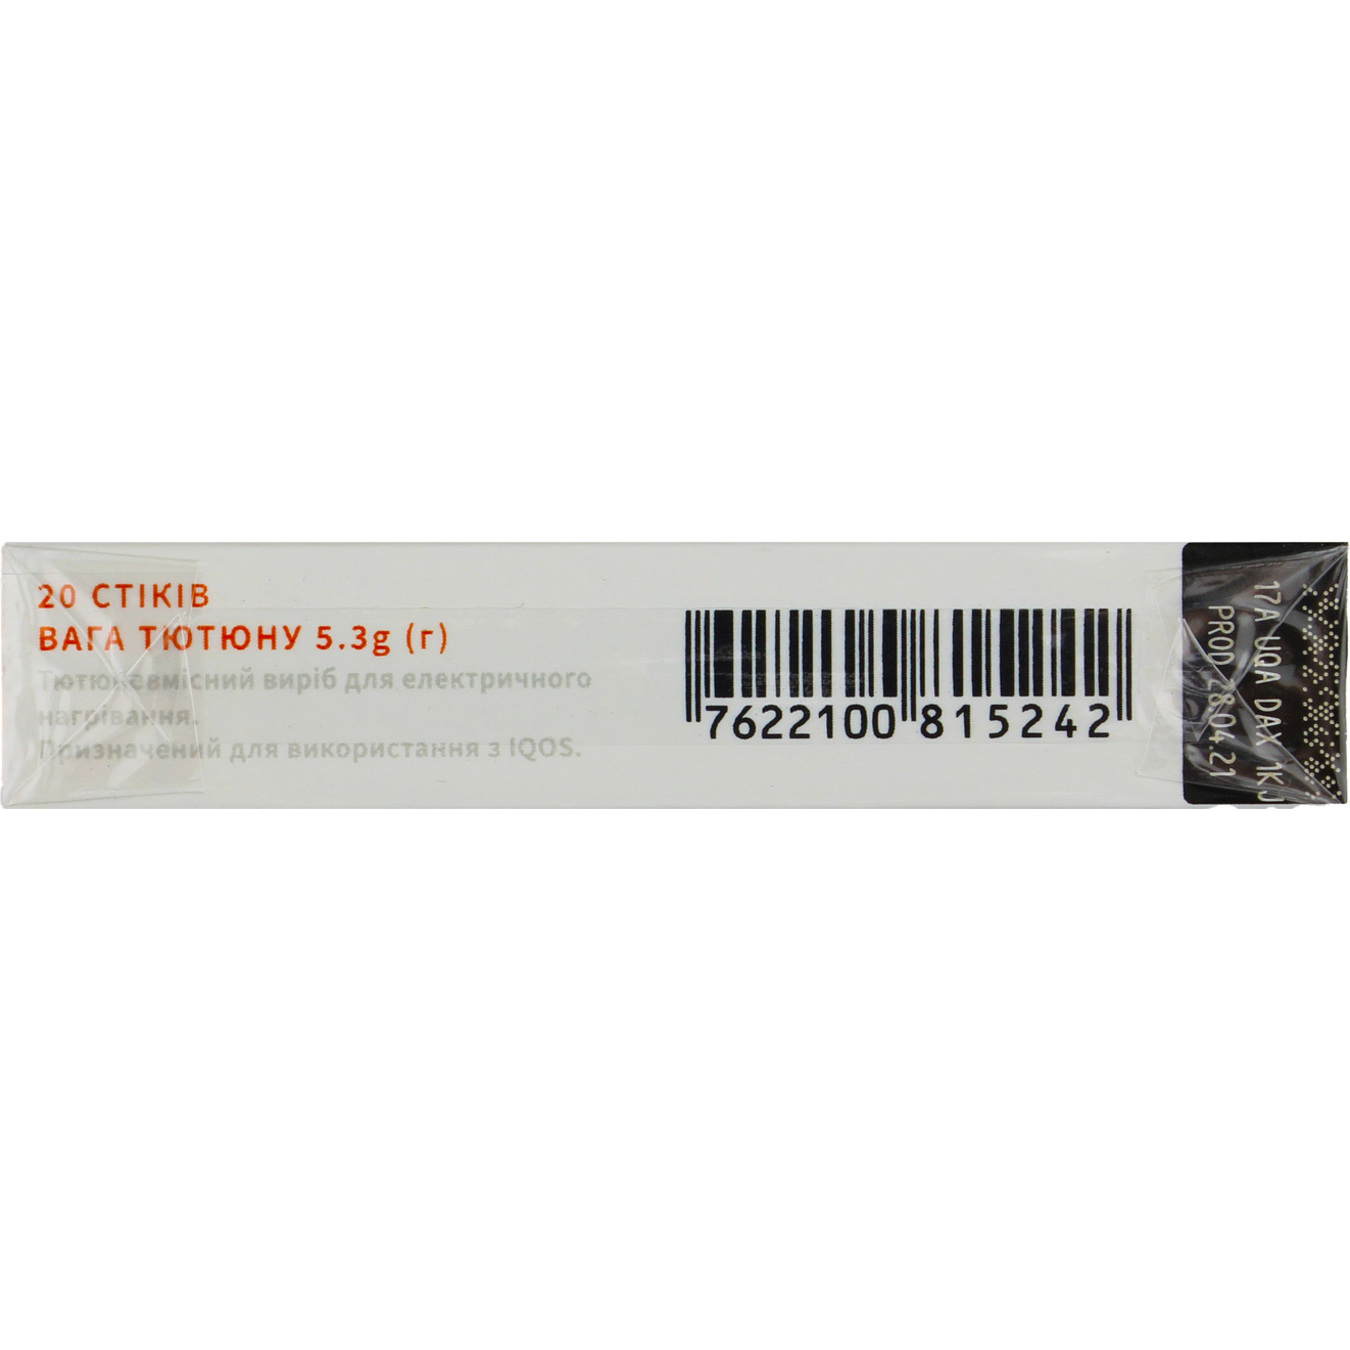 Heets Amber Label Sticks 20 pcs (the price is indicated without excise tax) 2